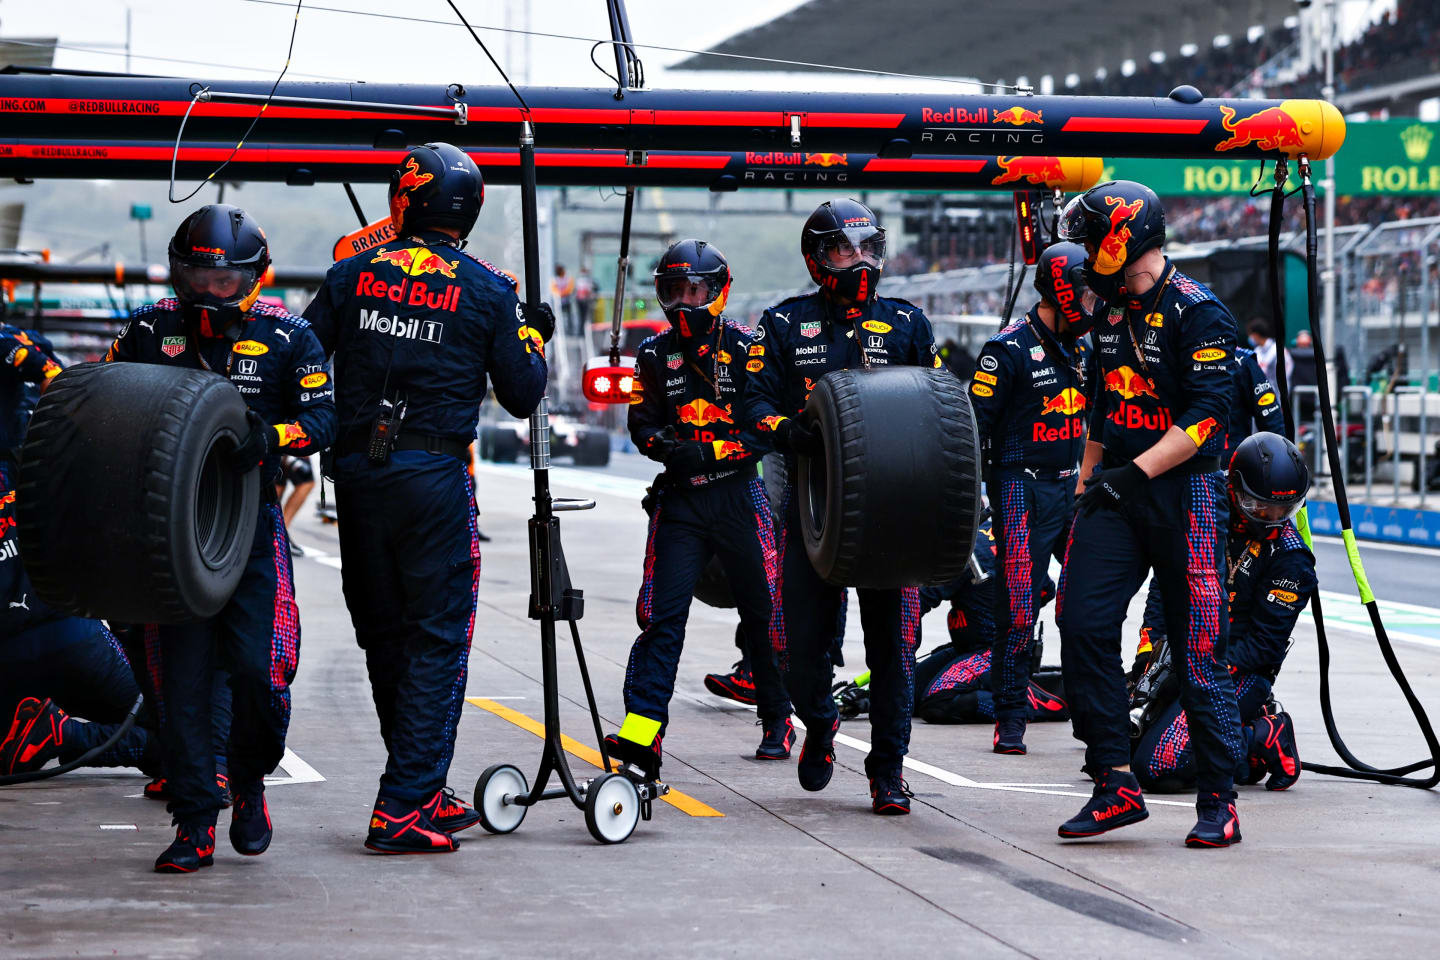 ISTANBUL, TURKEY - OCTOBER 10: The Red Bull Racing team carry in used tyres after a pitstop during